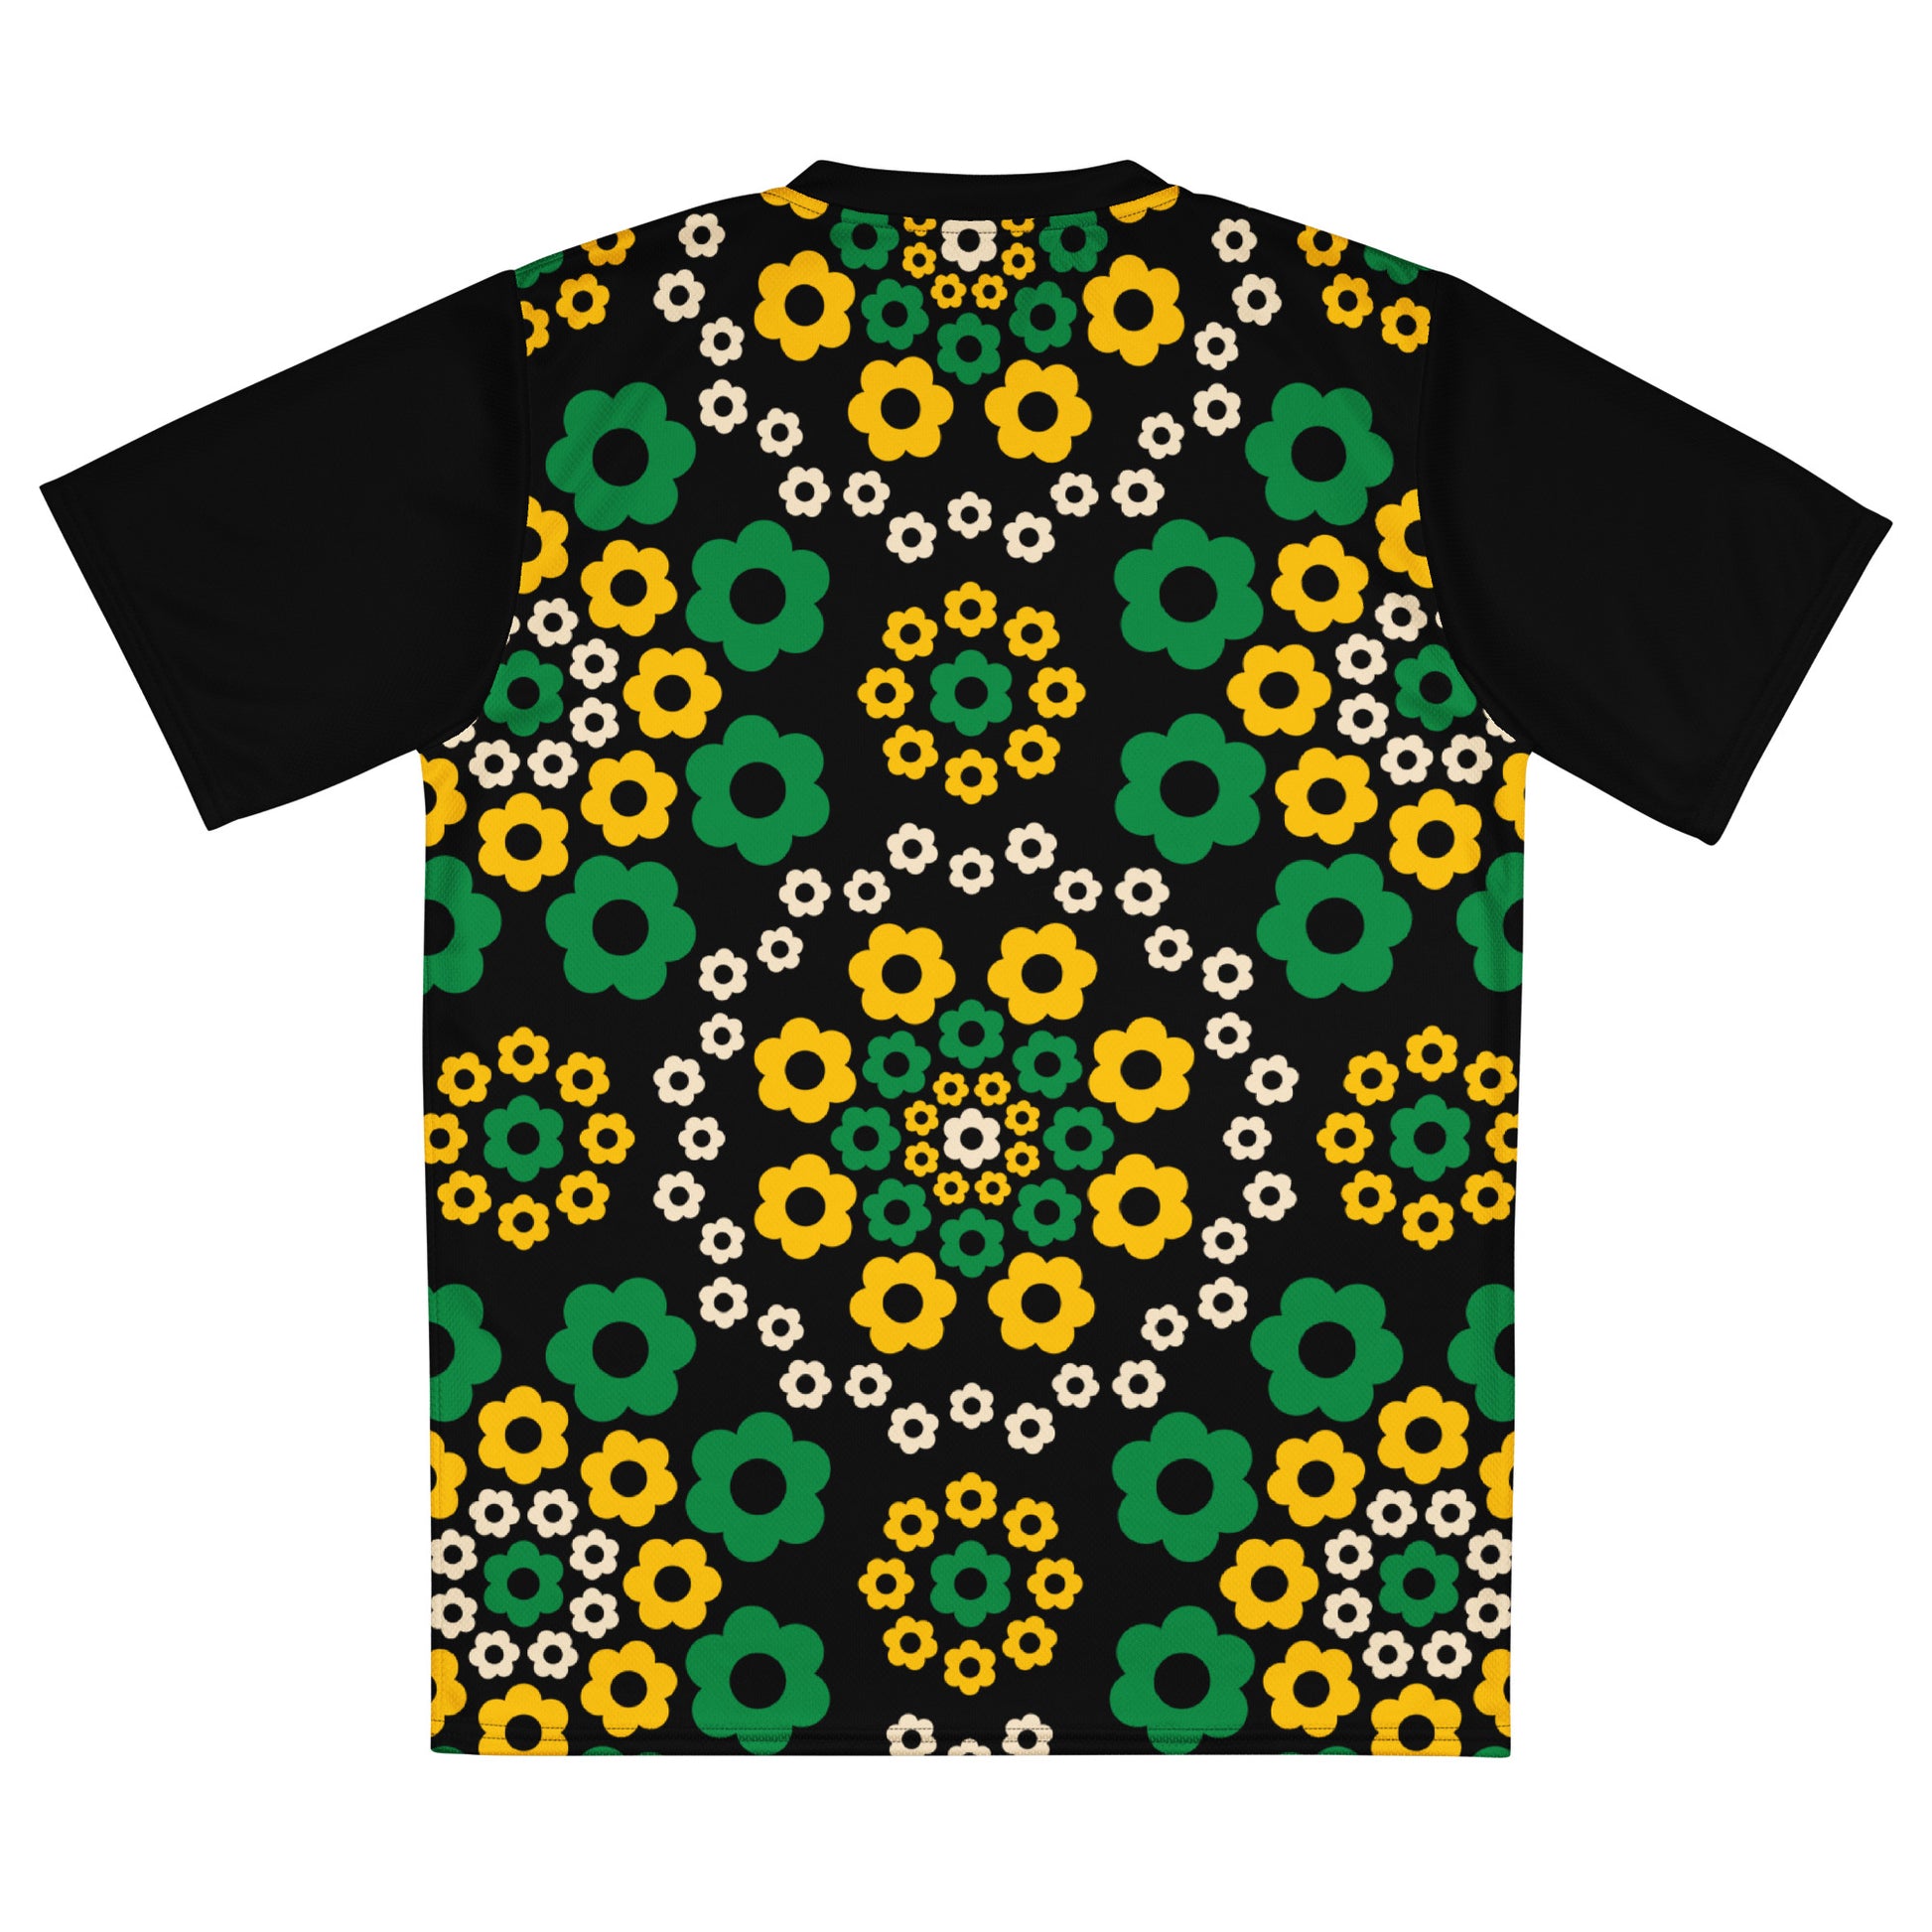 YESTERDAY yellow green - Recycled unisex sports jersey